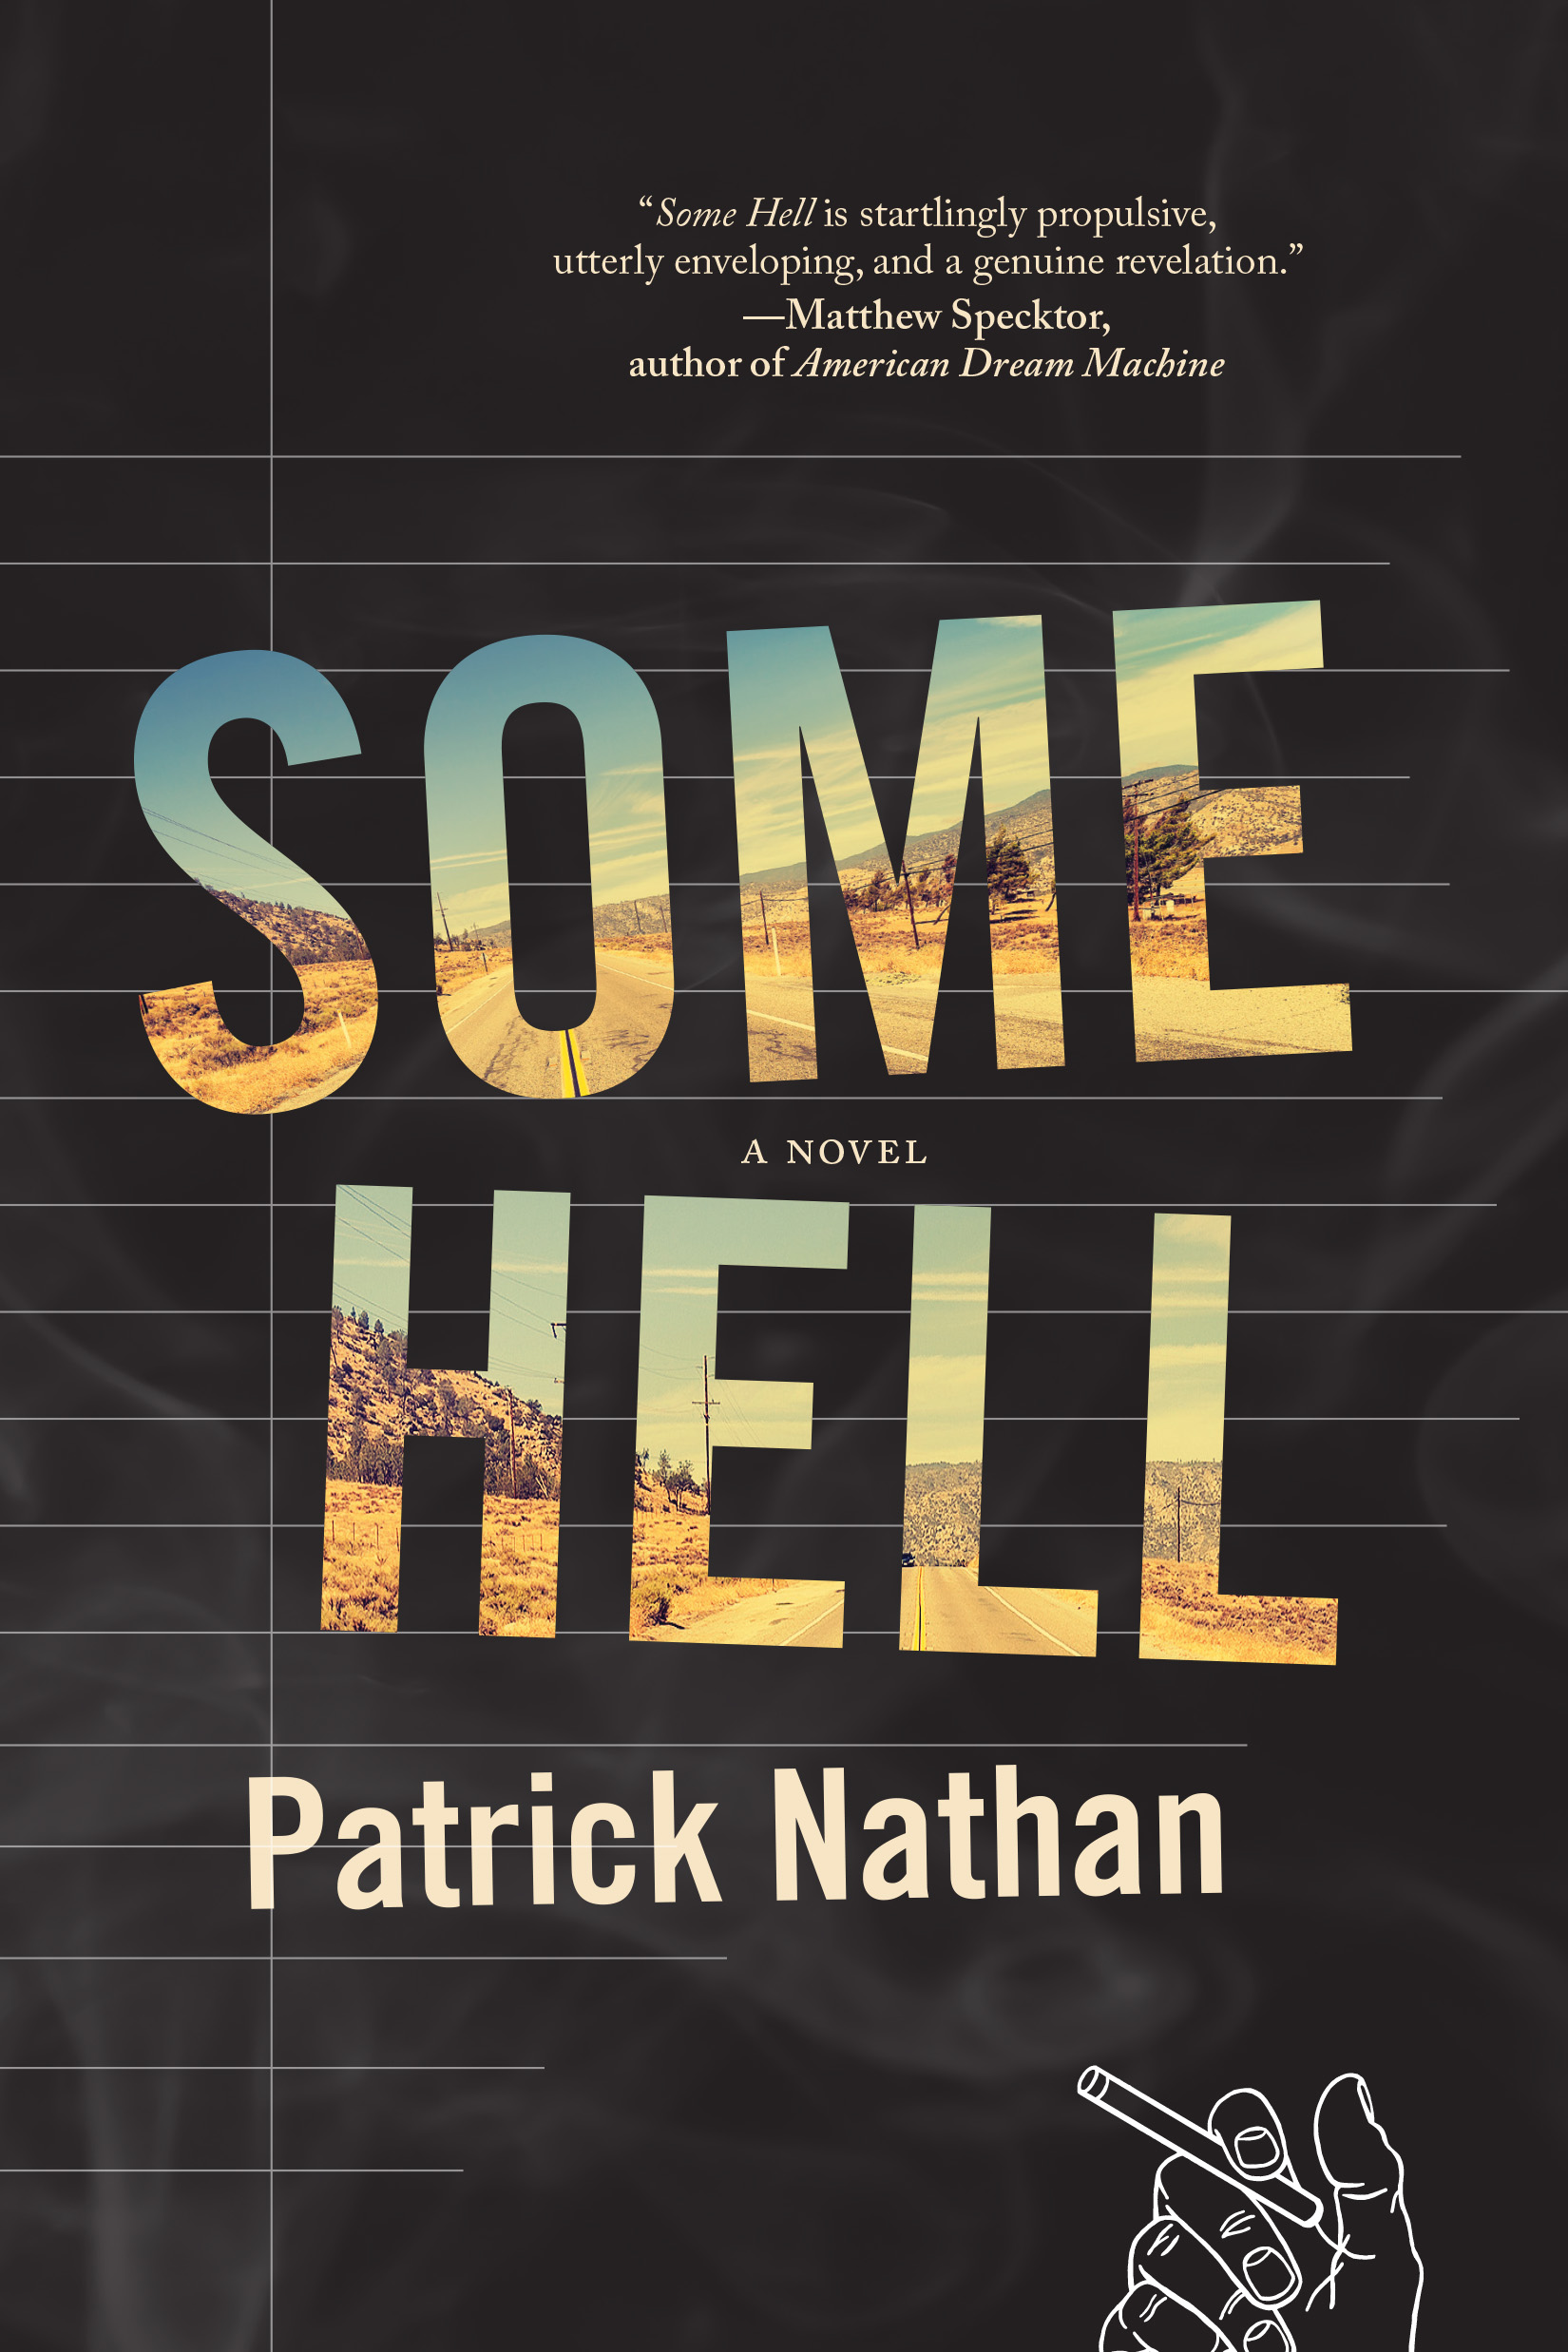 Book Launch: Some Hell by Patrick Nathan — in conversation w/ Mark Doten